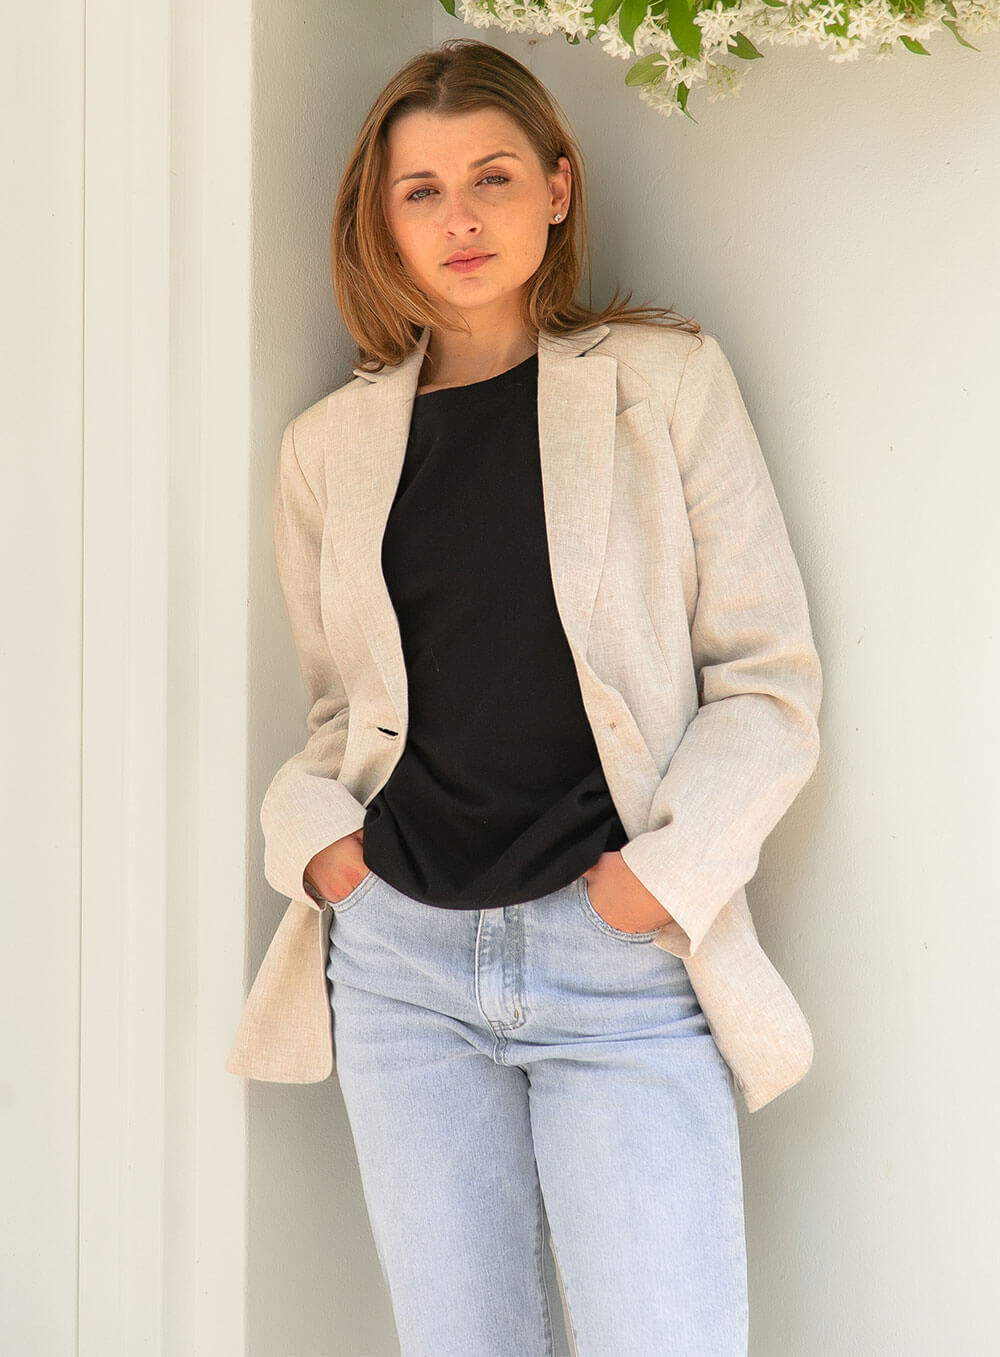 The Harper Linen Blazer has shoulder pads, is fully lined with tortoiseshell buttons and functional button closures. A tailored cut pocket with flap detailing.